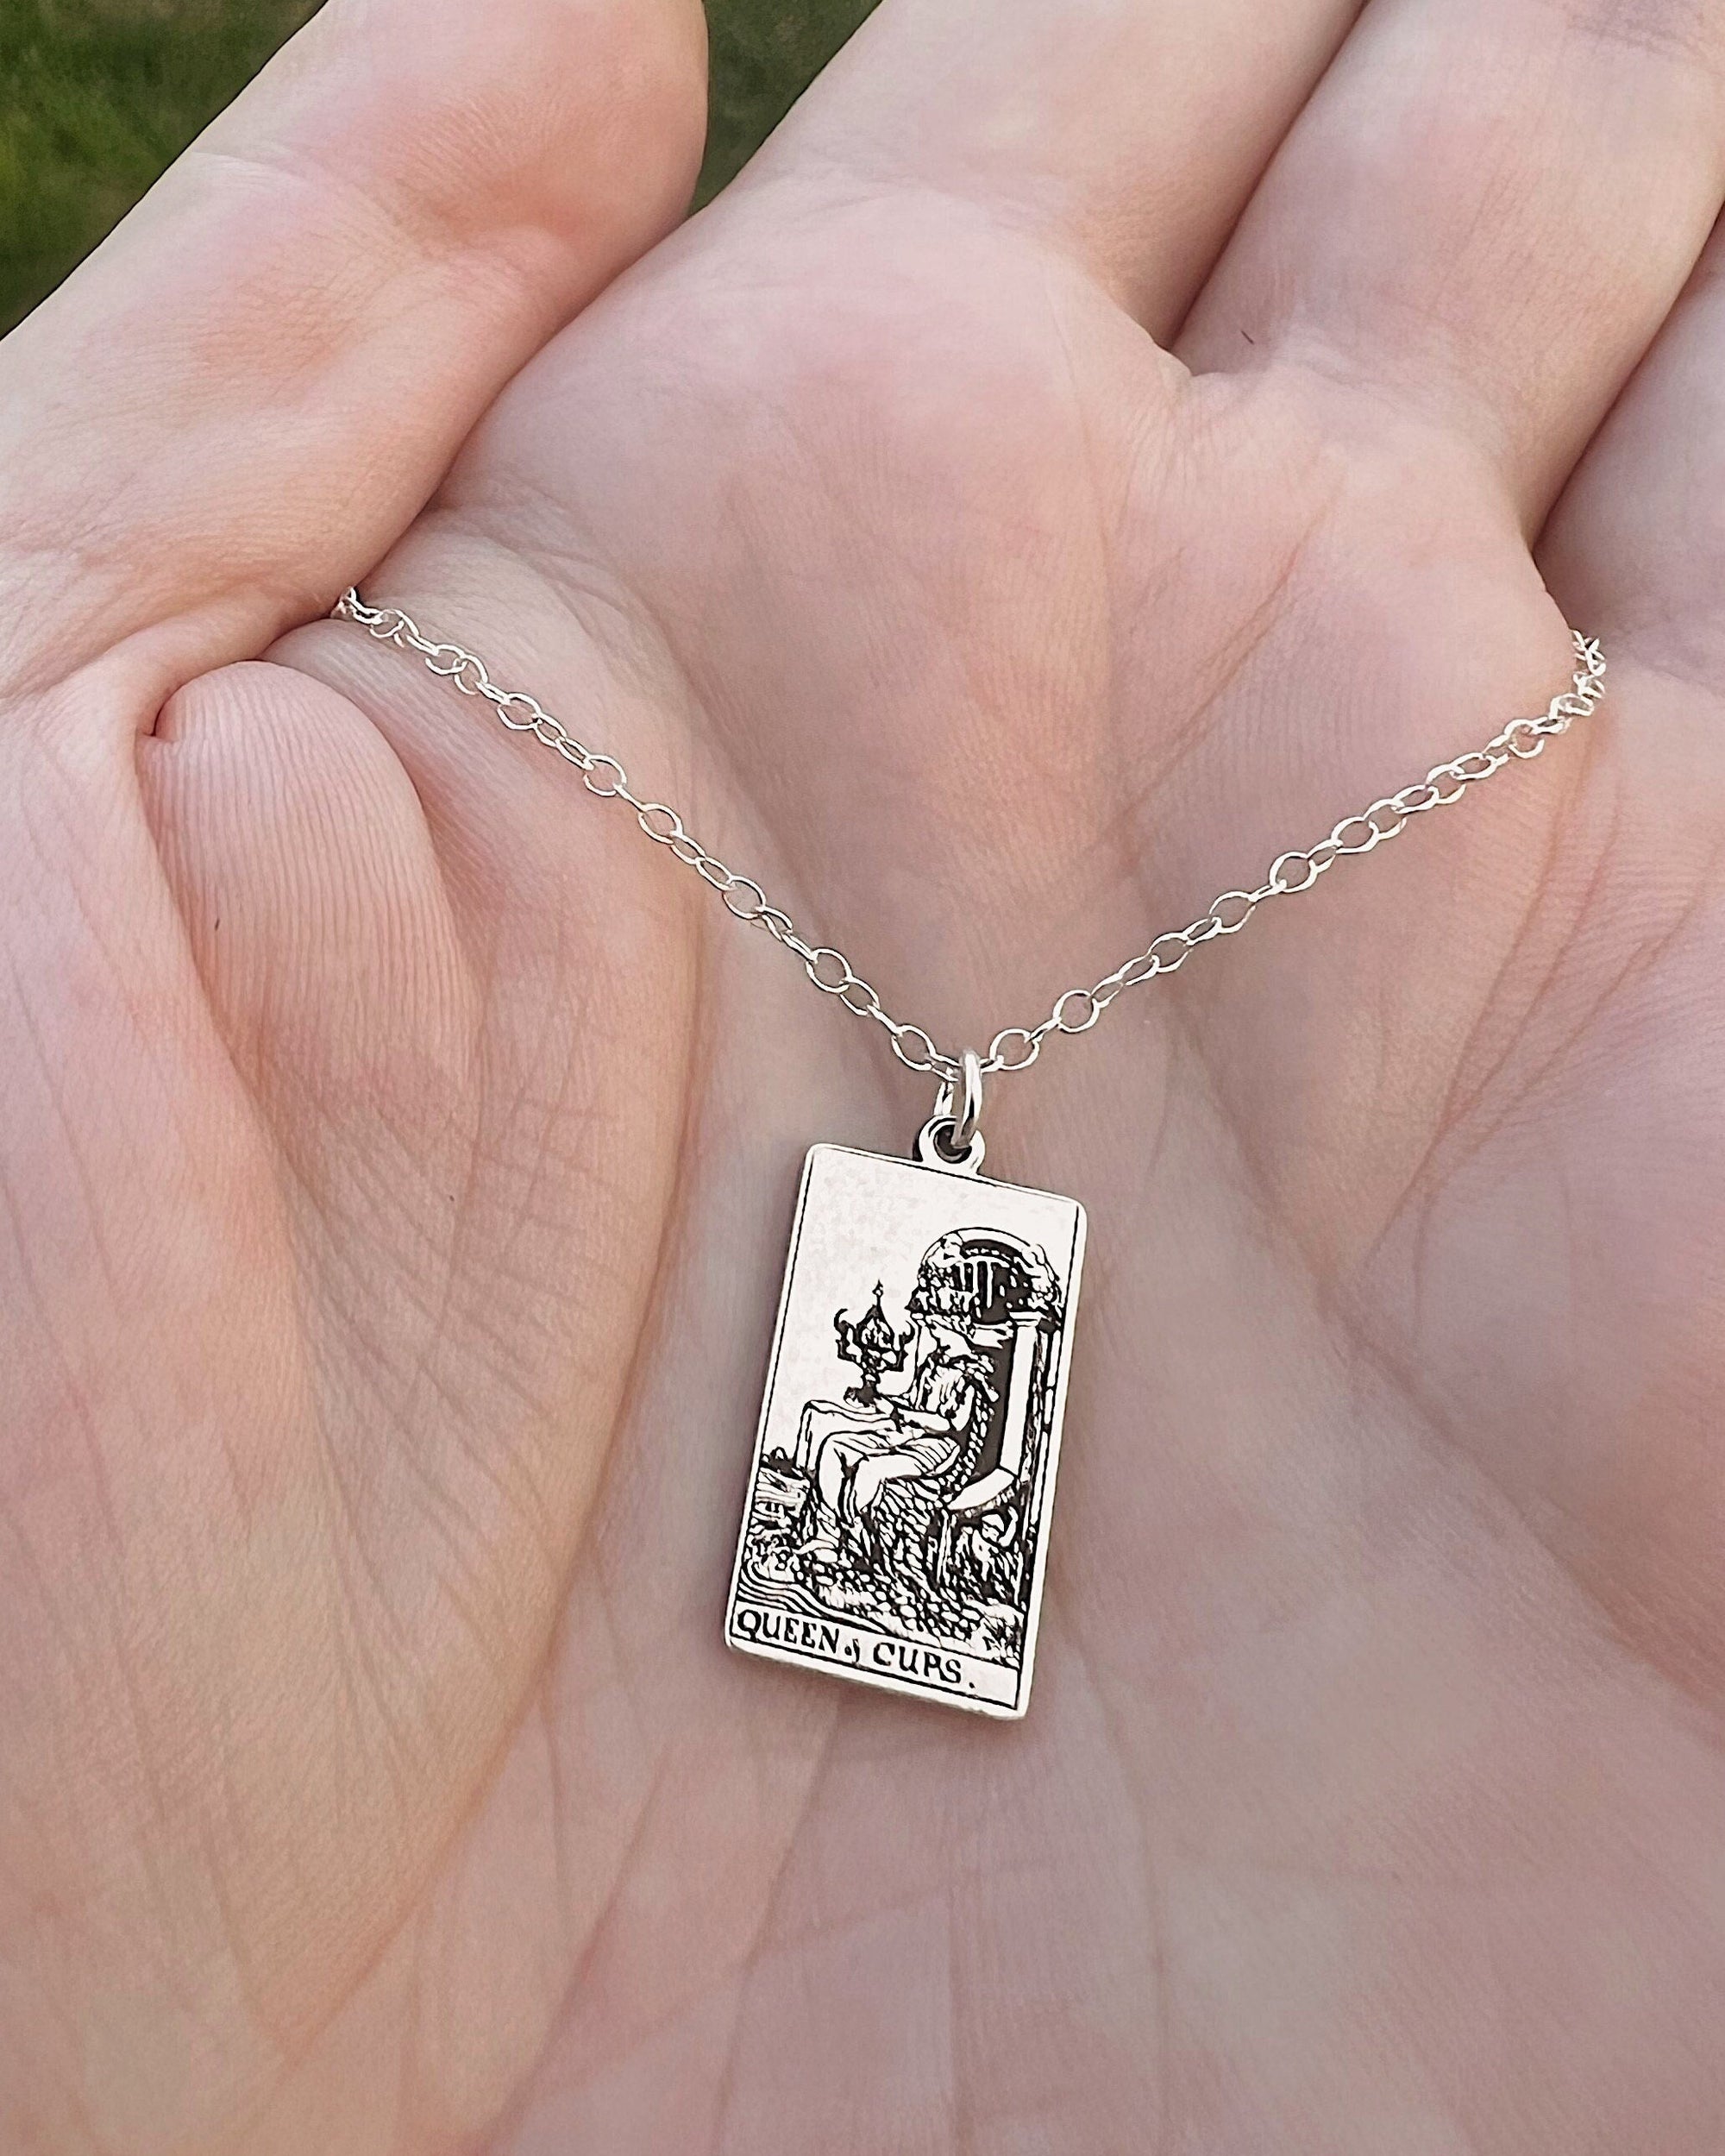 Queen of Cups Tarot Card Necklace - Sterling Silver